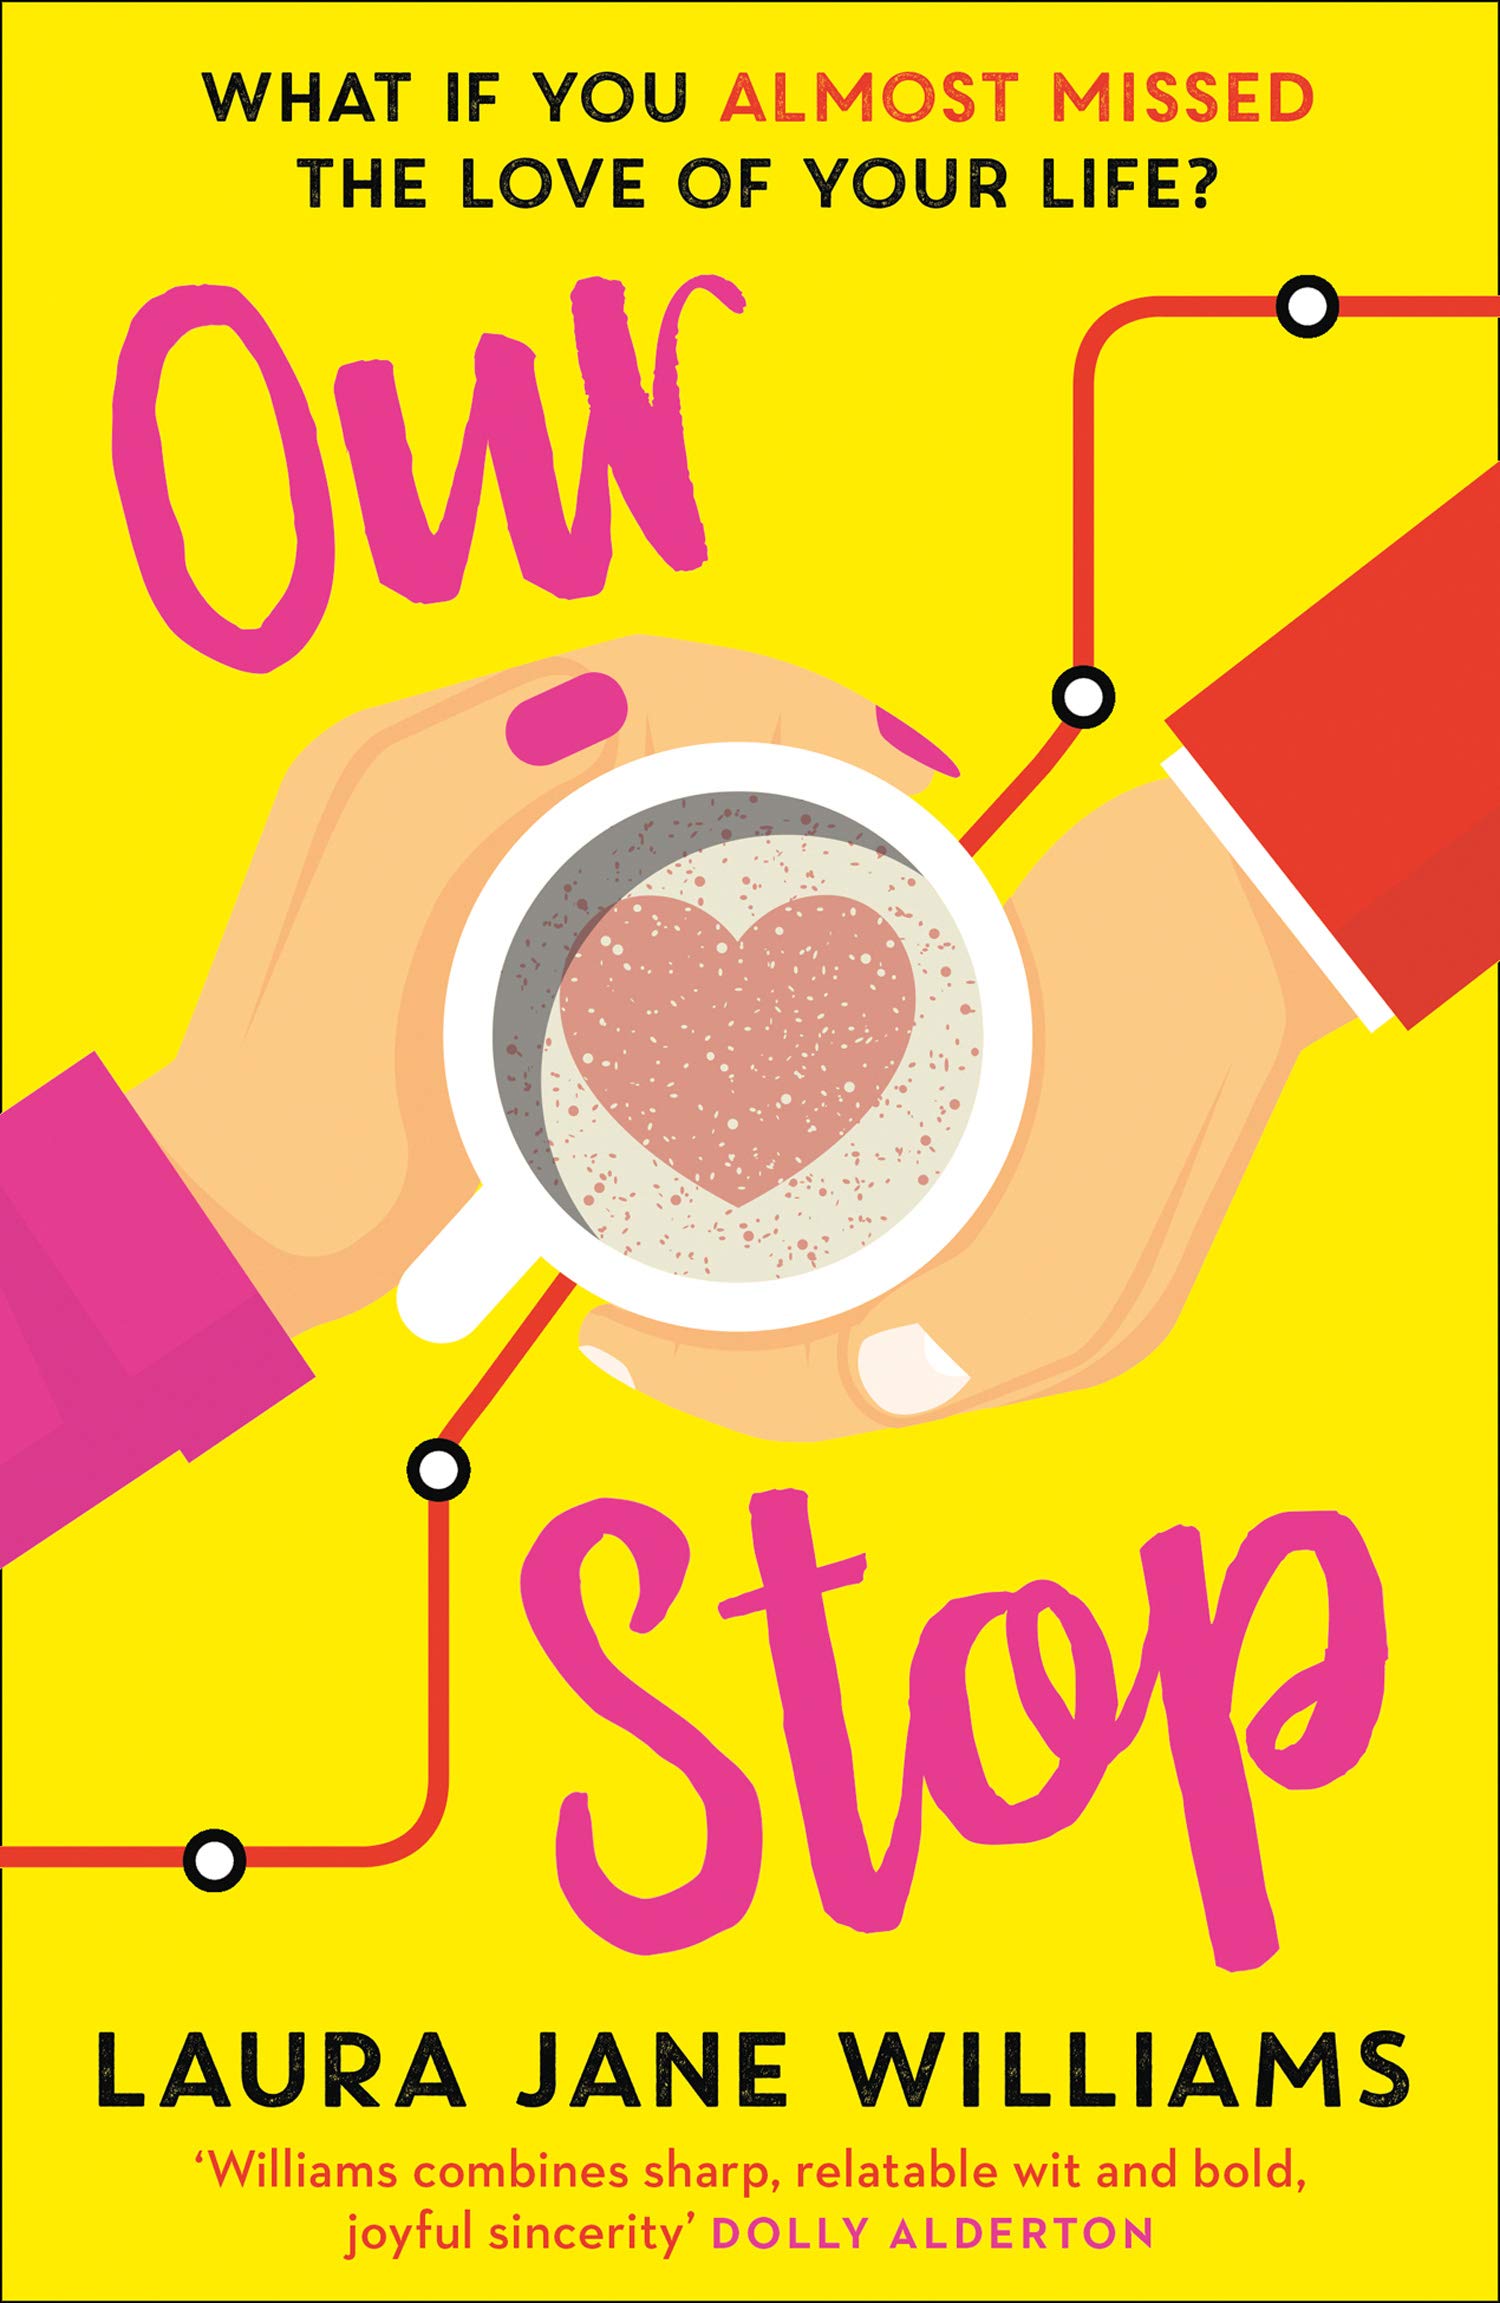 Our Stop | Laura Jane Williams